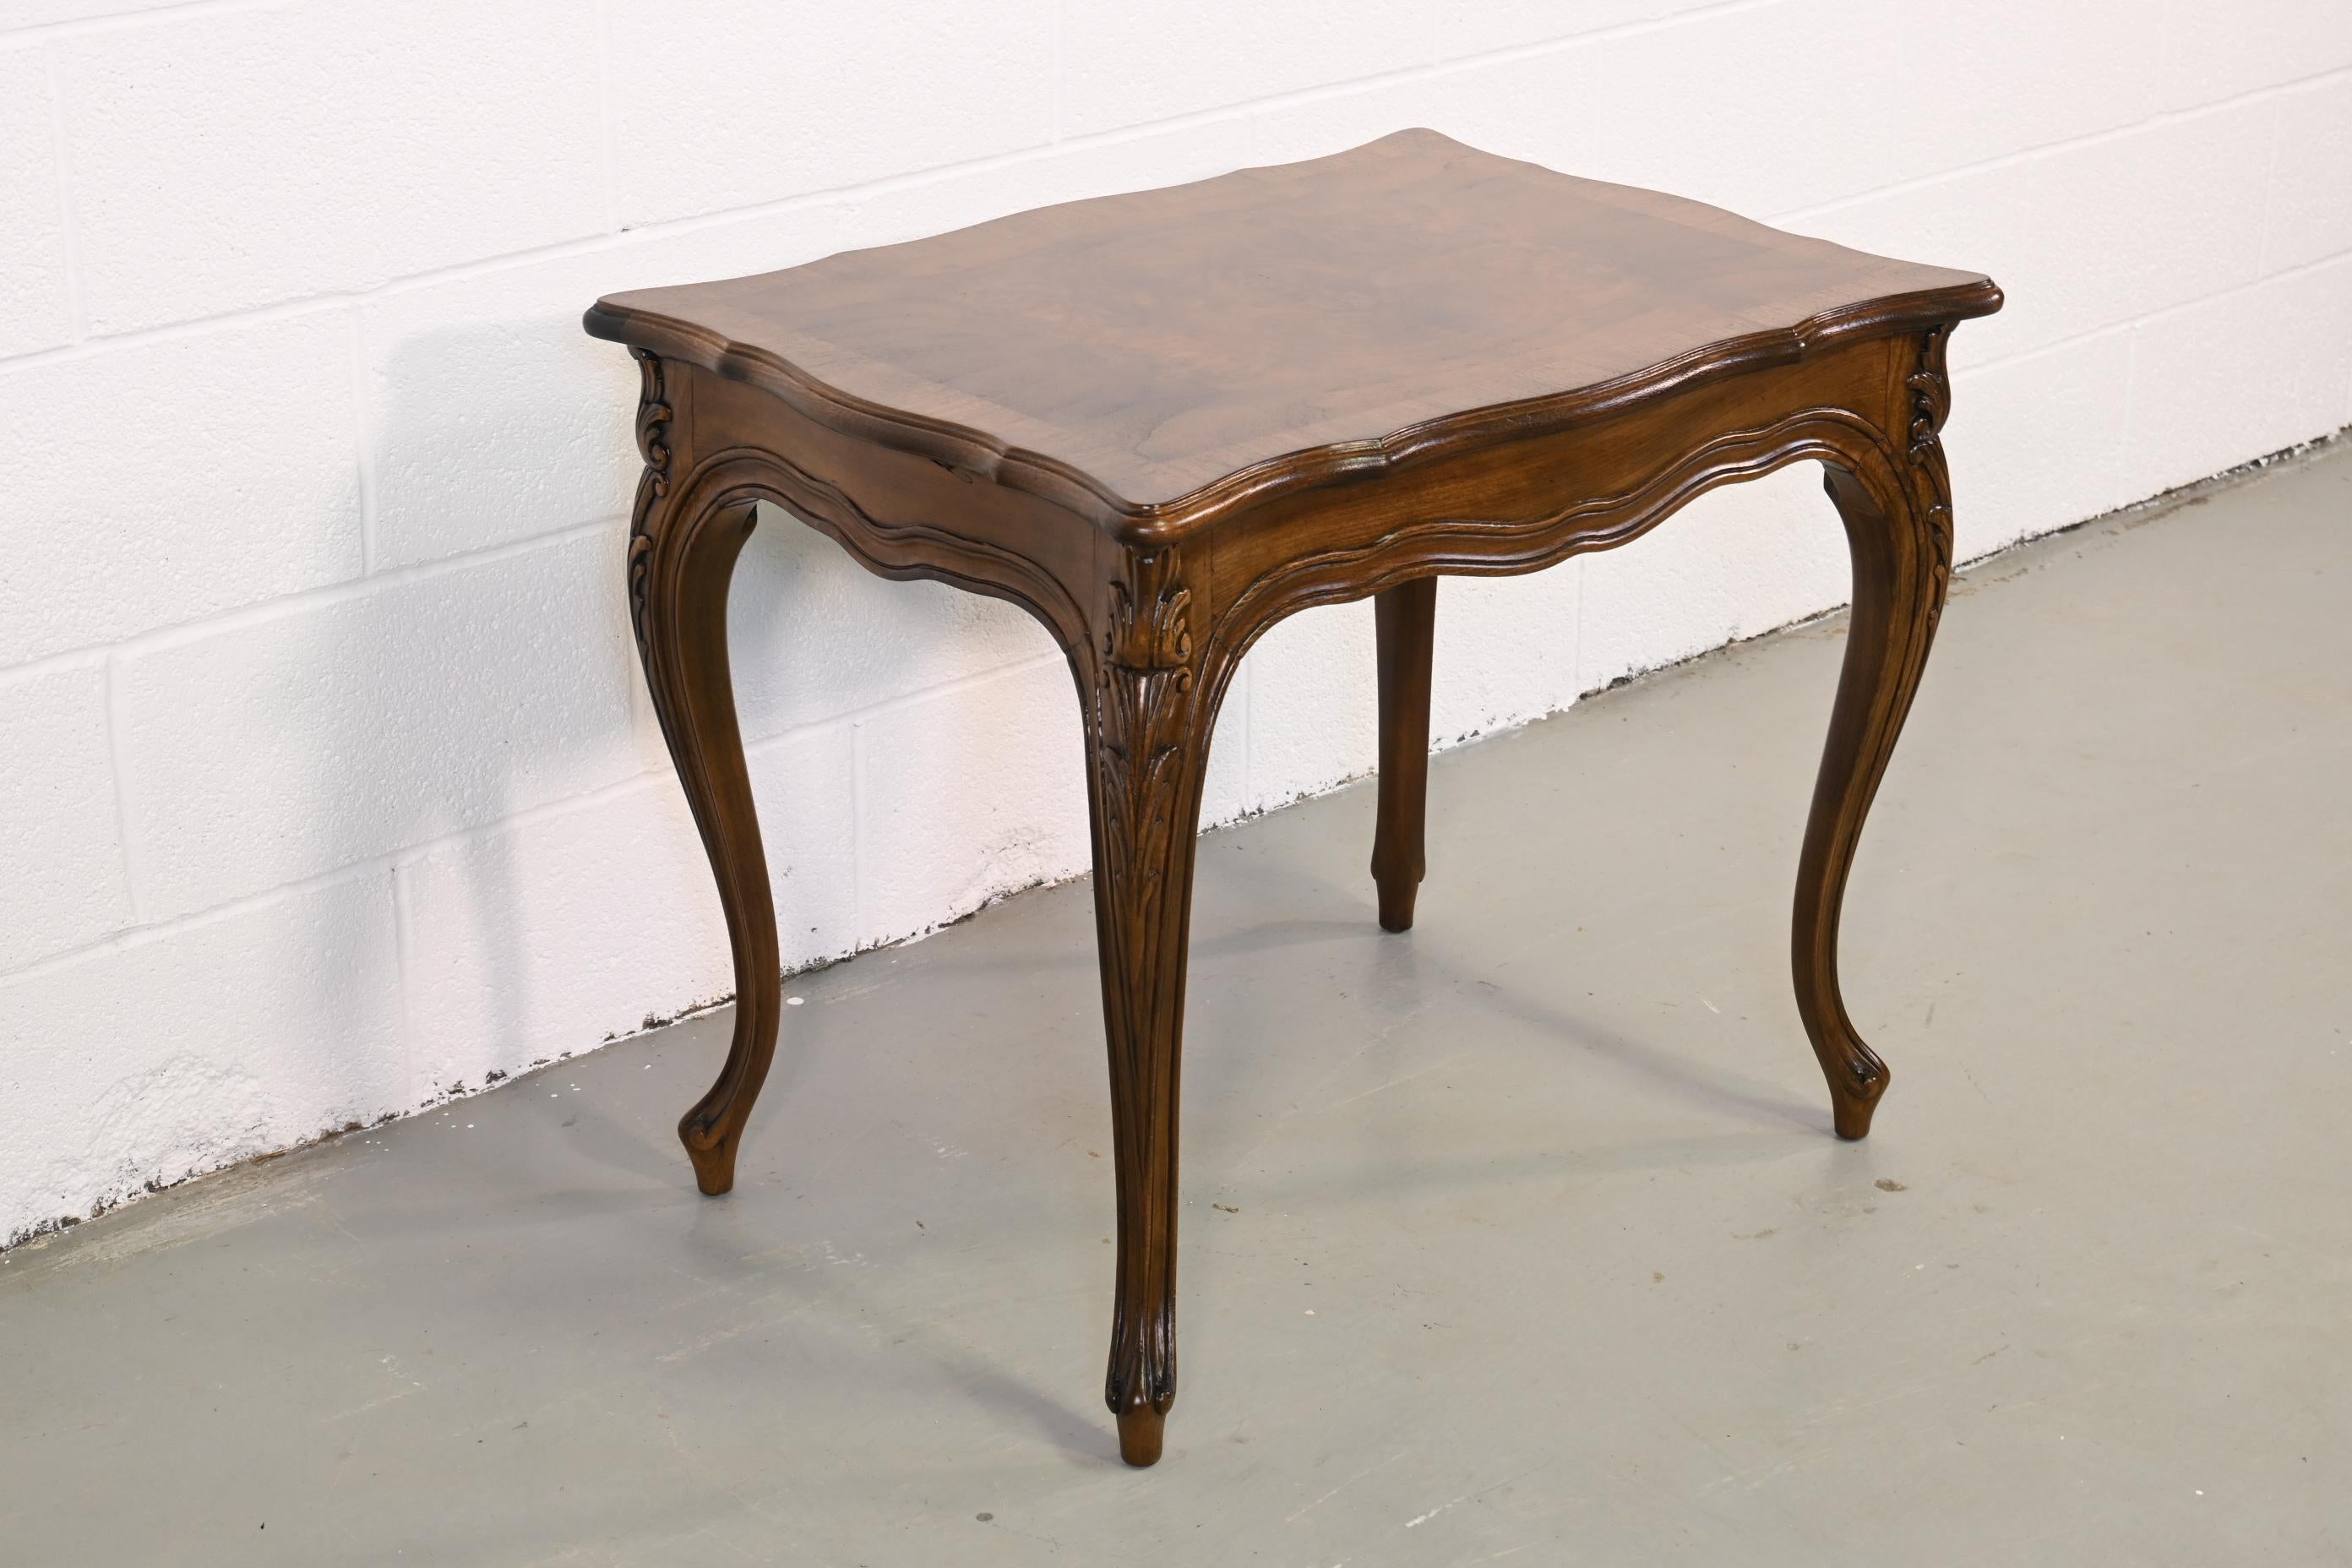 Karges Furniture French Provincial Burled Walnut End Tables - a Pair For Sale 4